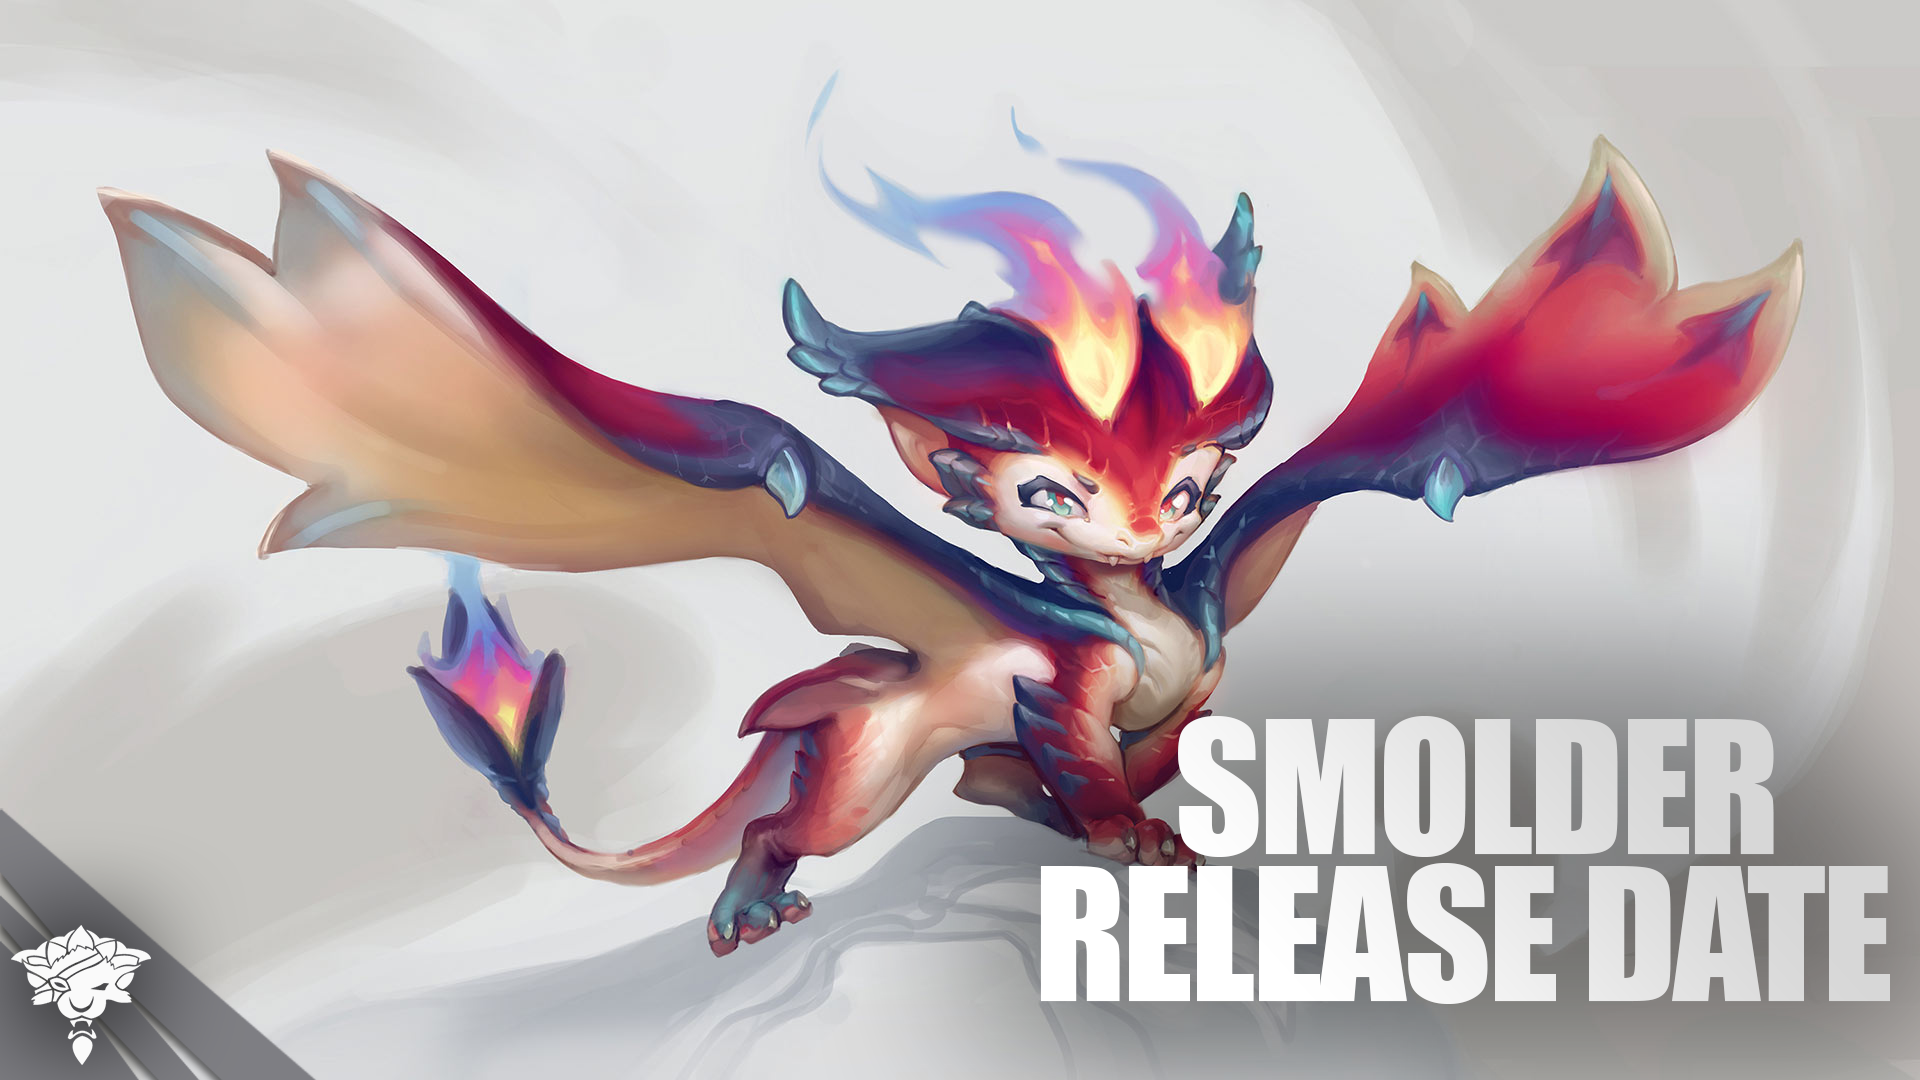 LoL Smolder Abilities, Release Date, and more!